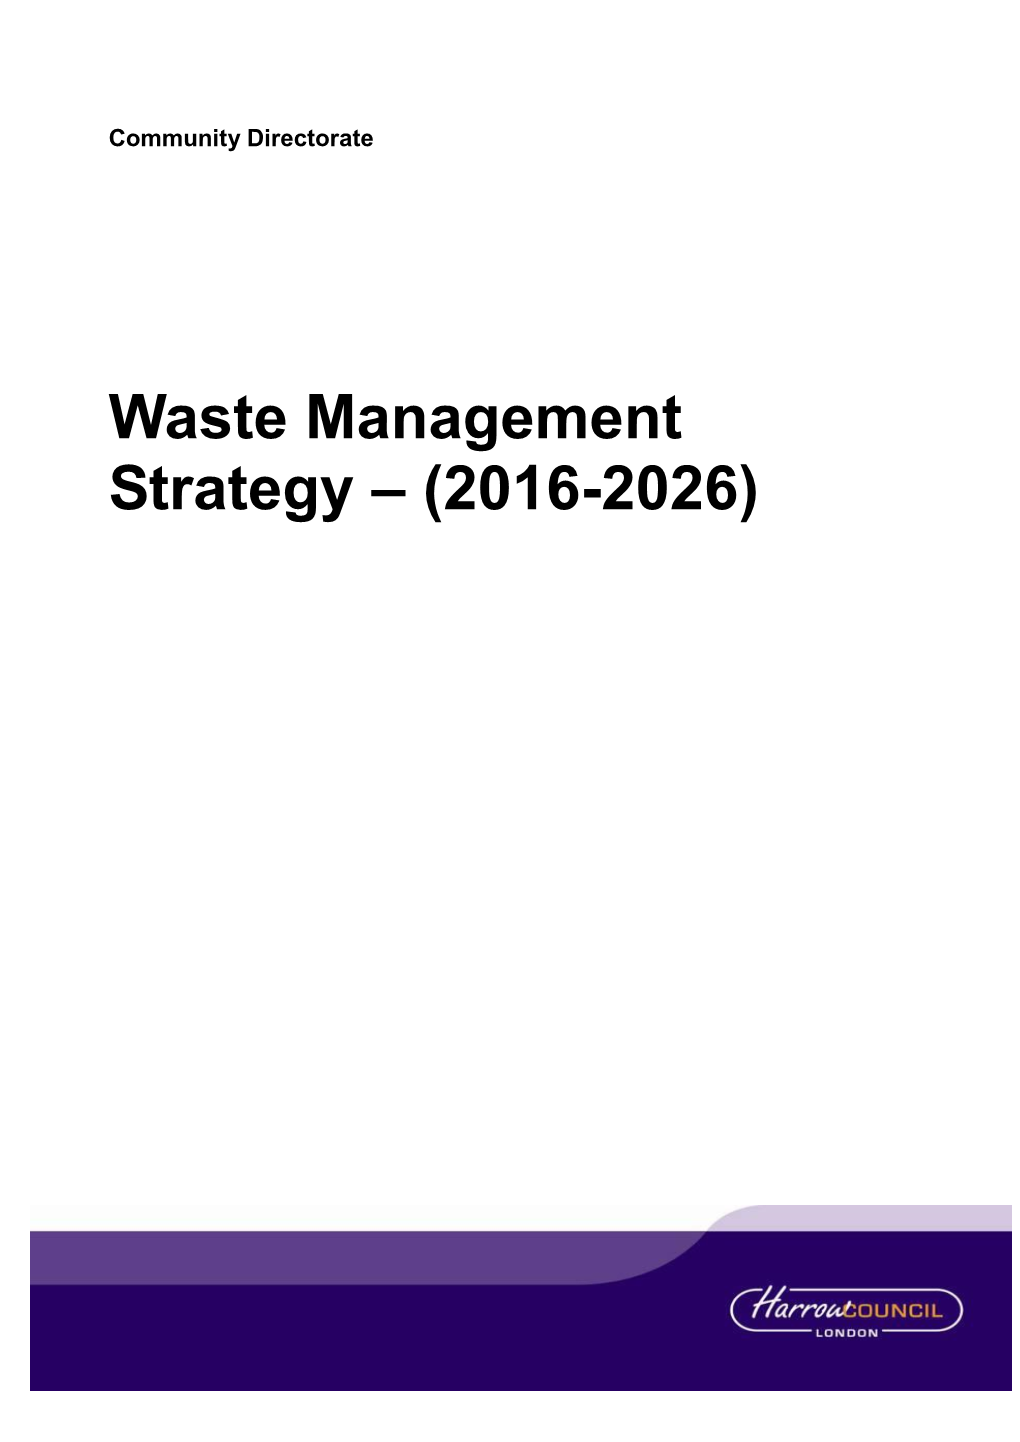 Waste Management Strategy 2016-2026